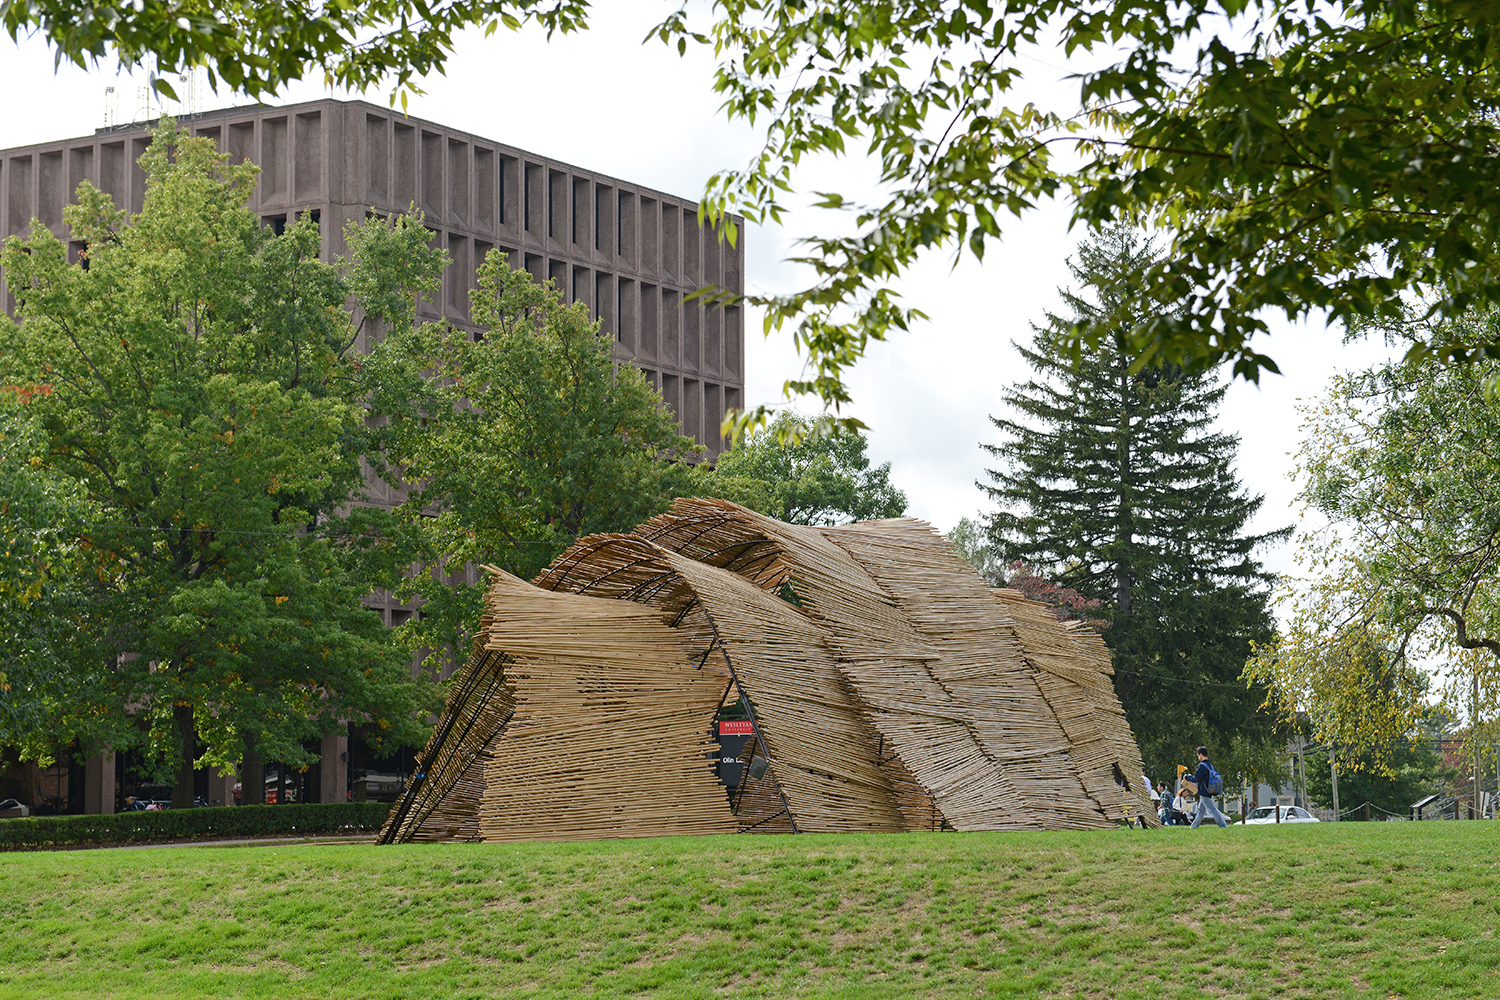 WesSukkah, pictured here on Oct. 7, is a temporary structure located on the lawn of Olin Library.